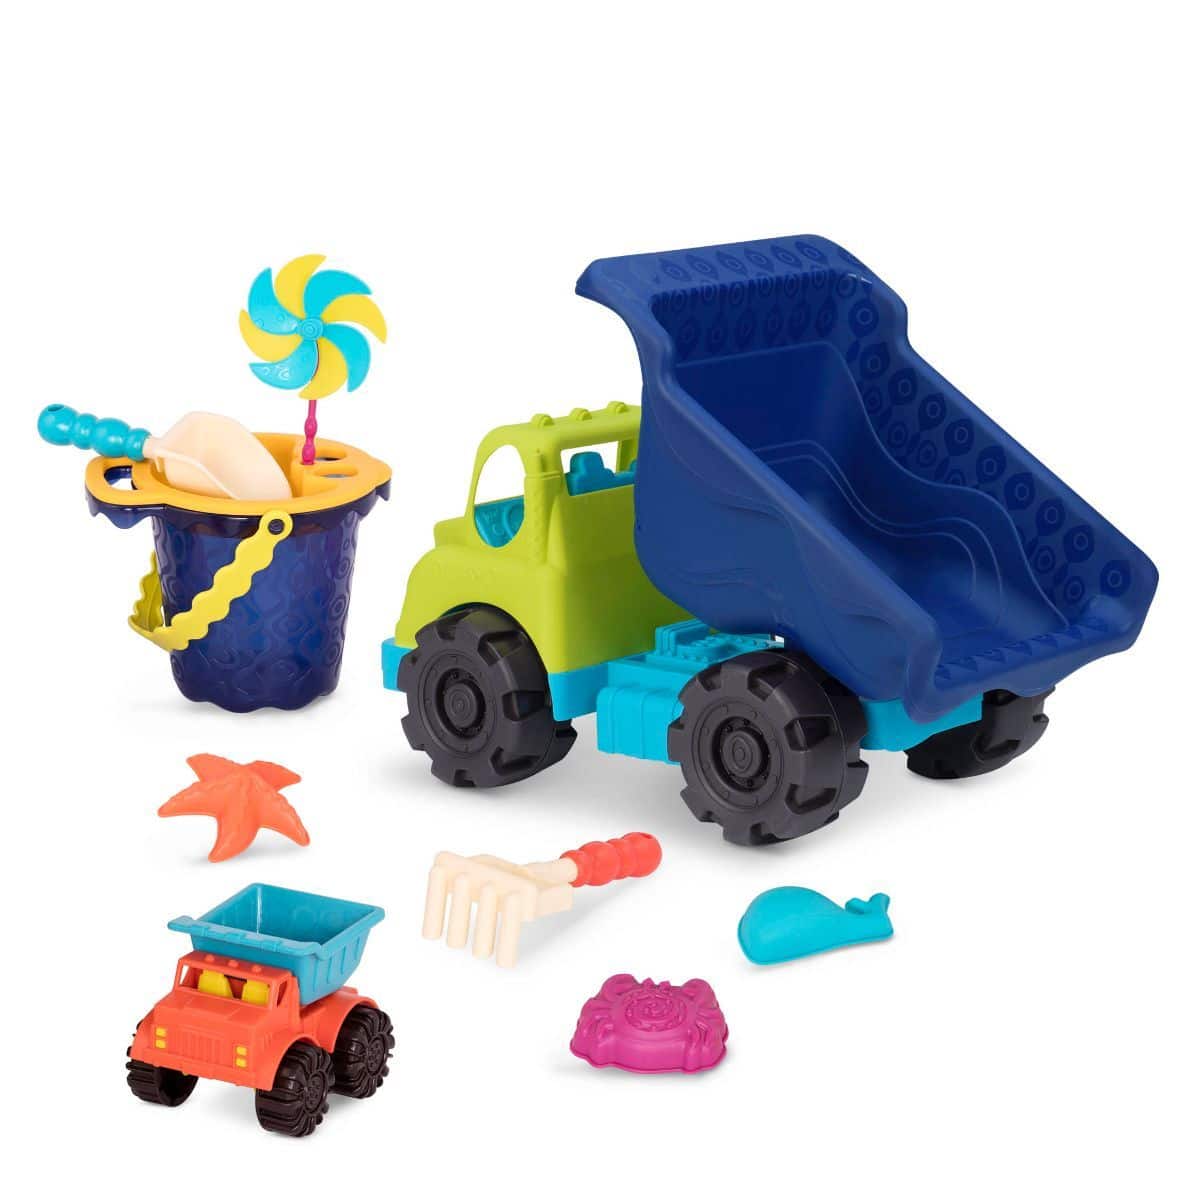 Dump truck duo and beach toys